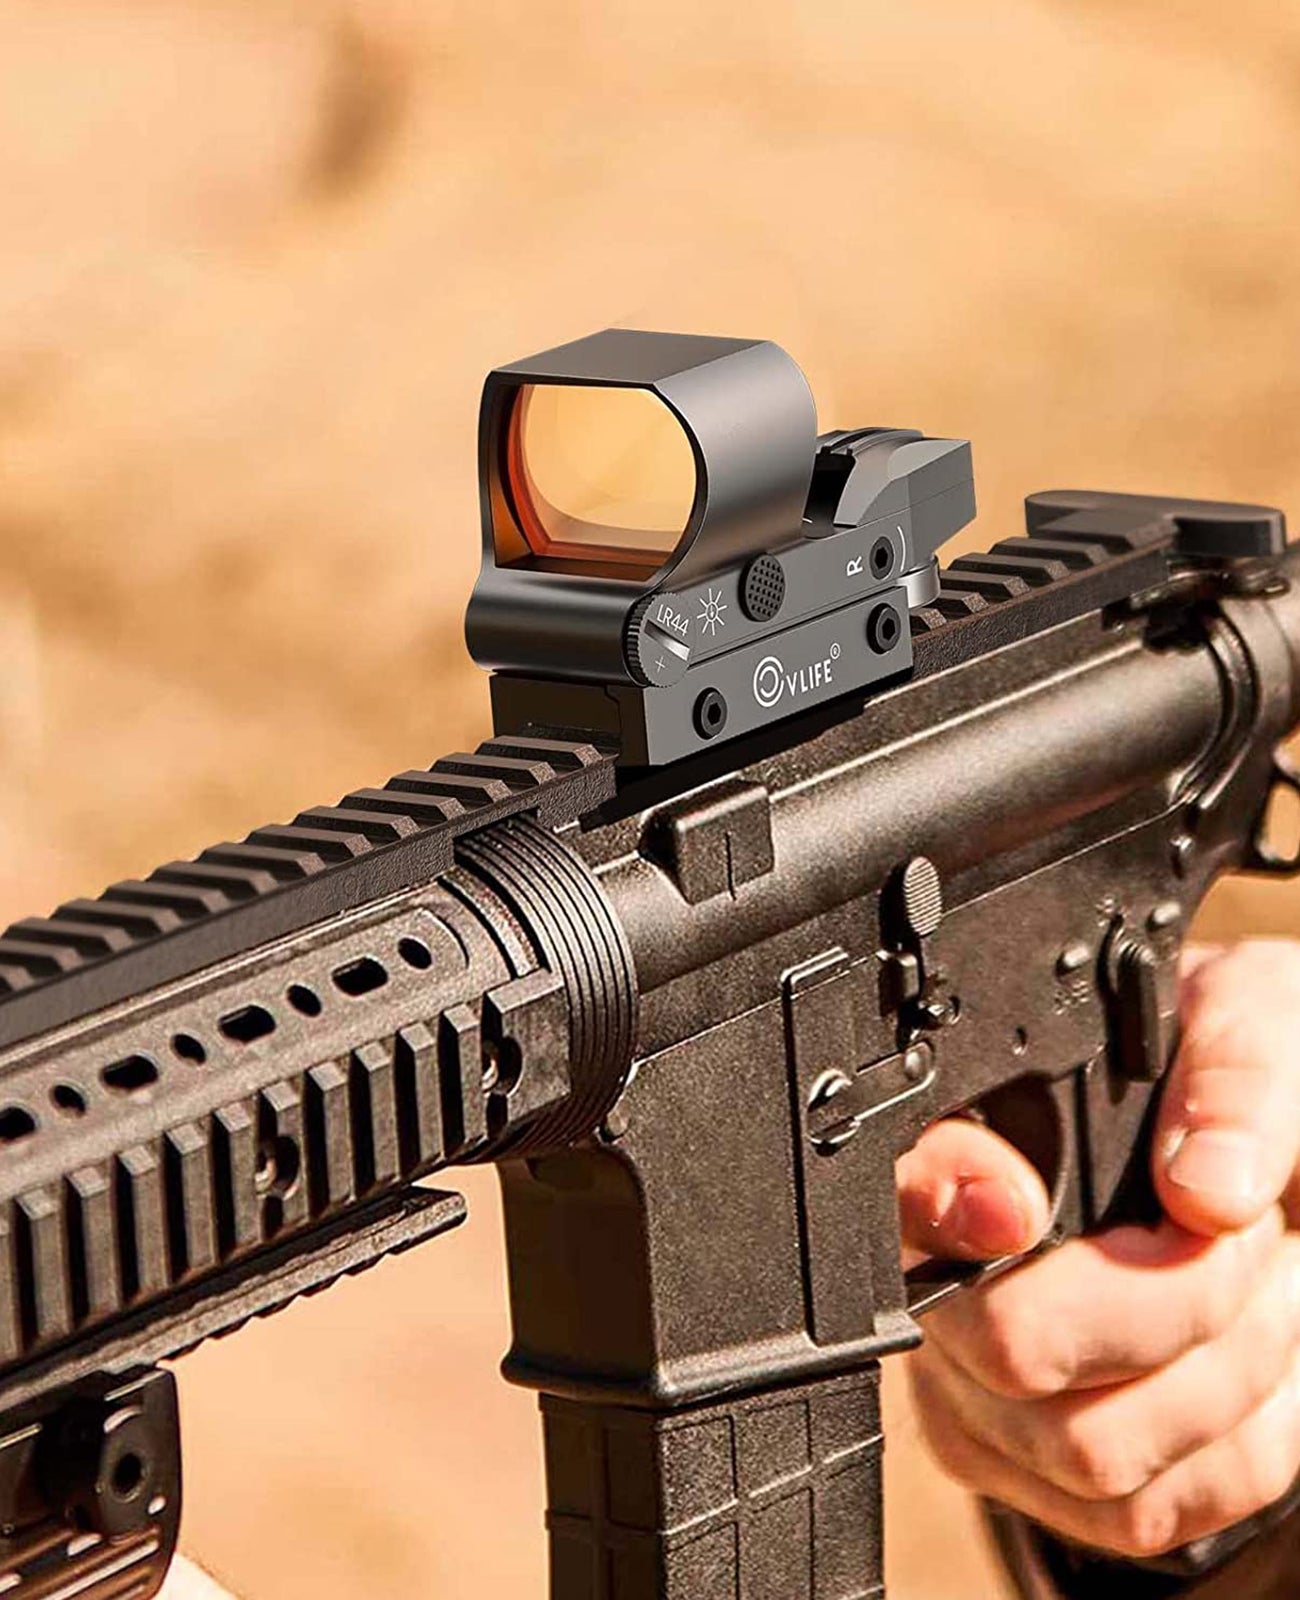 RS-M Close Red Dot Sight for Picatinny. 2.5 MOA